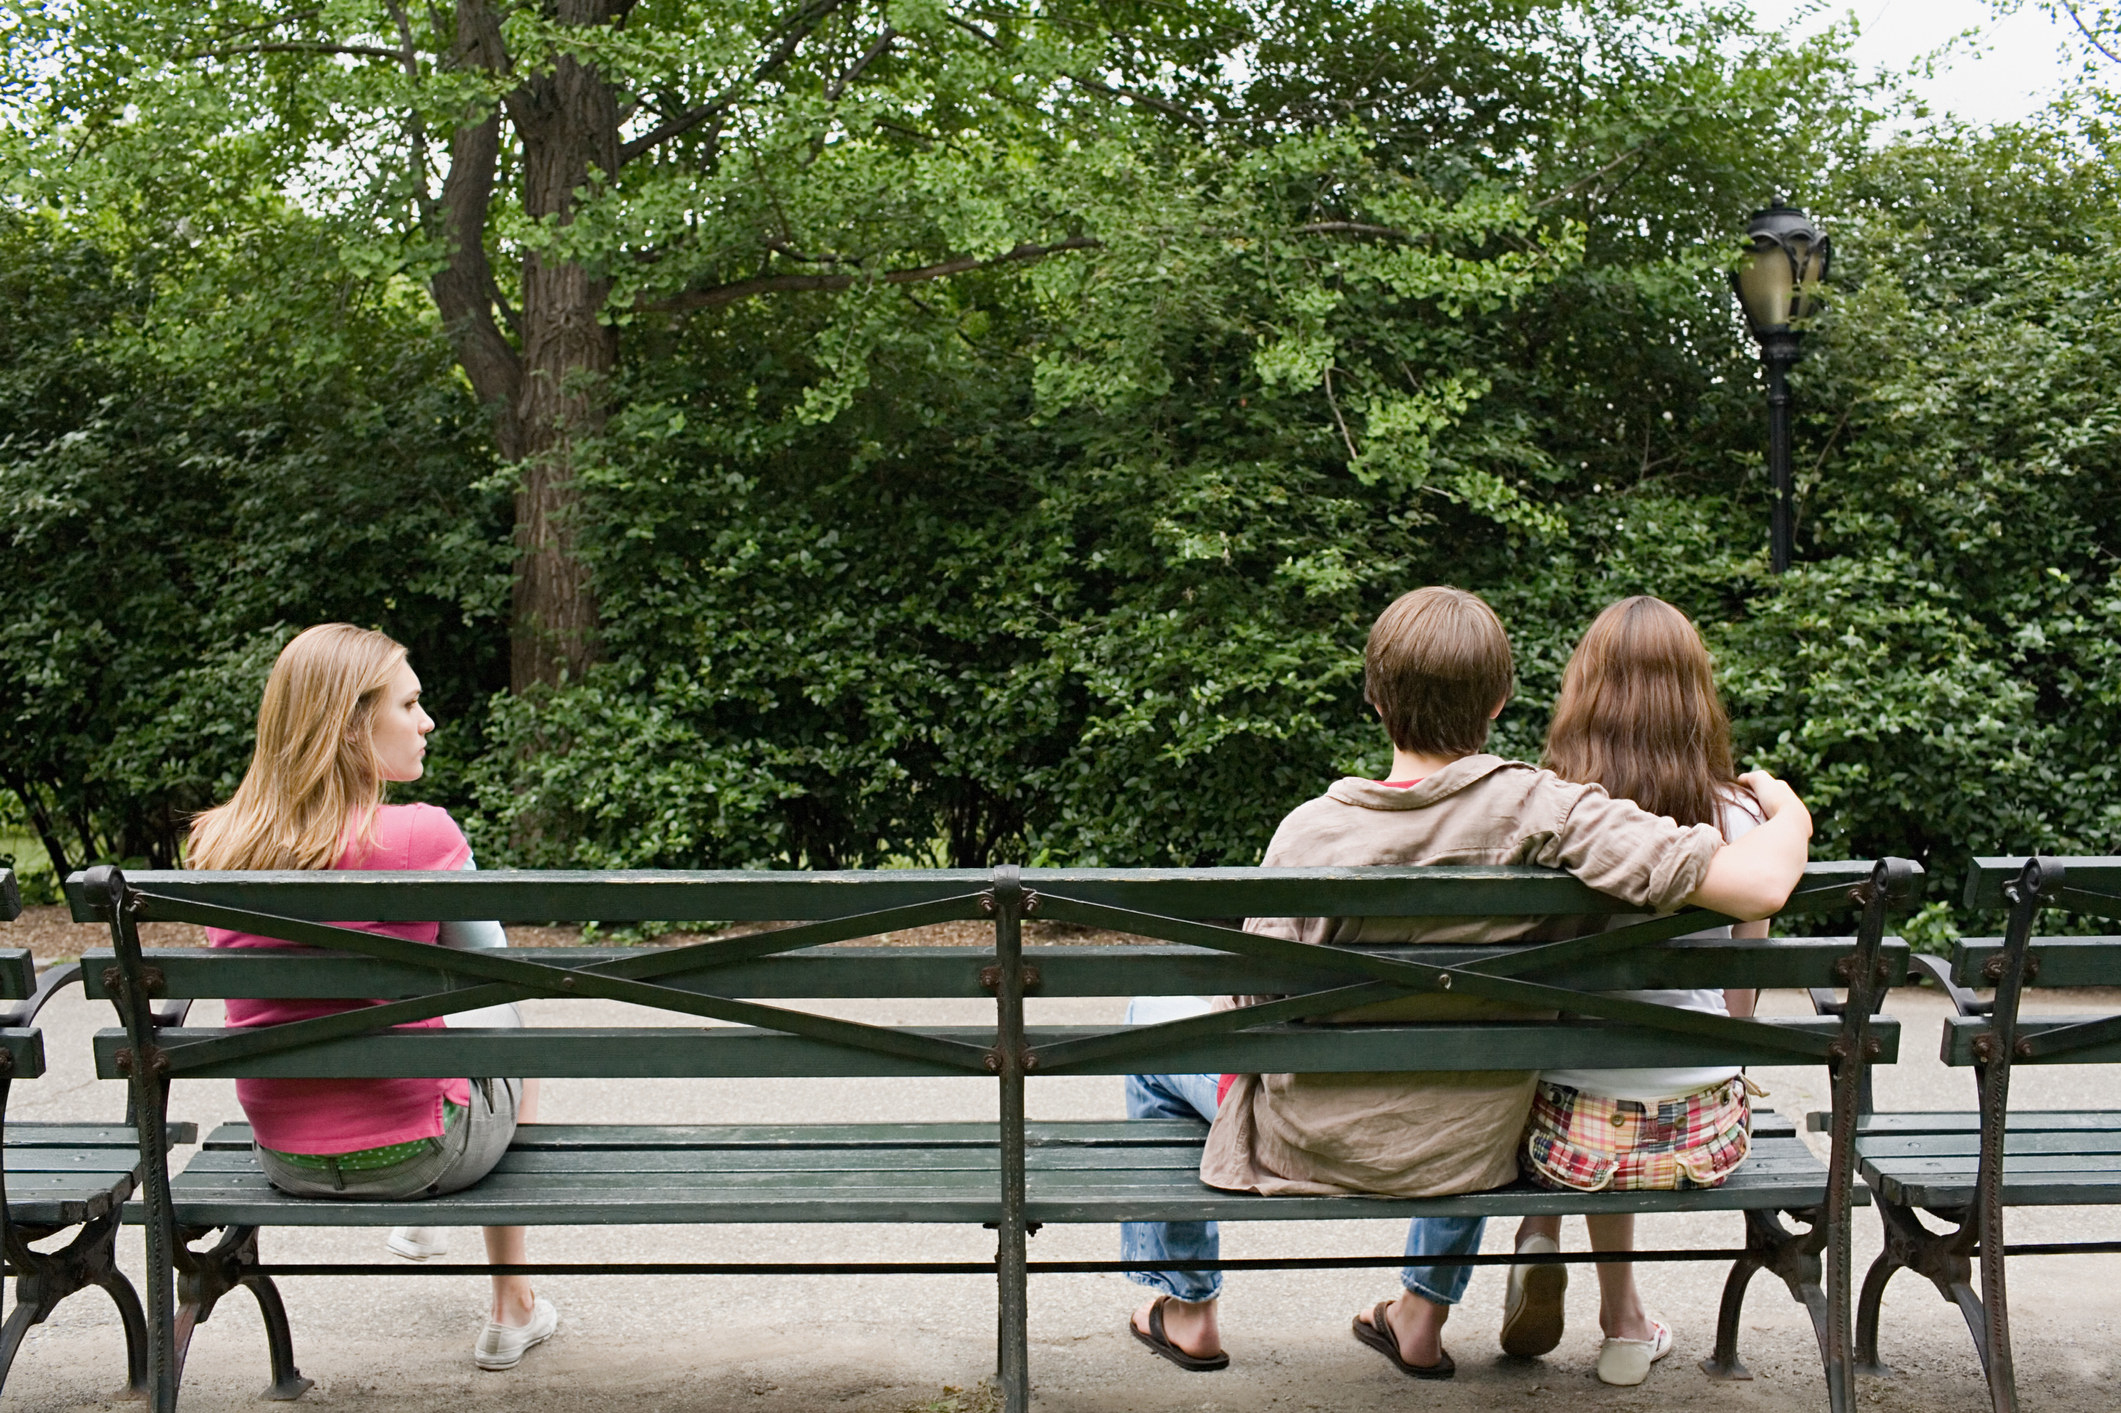 a woman alone at one end of a bench and a couple cuddling at the other